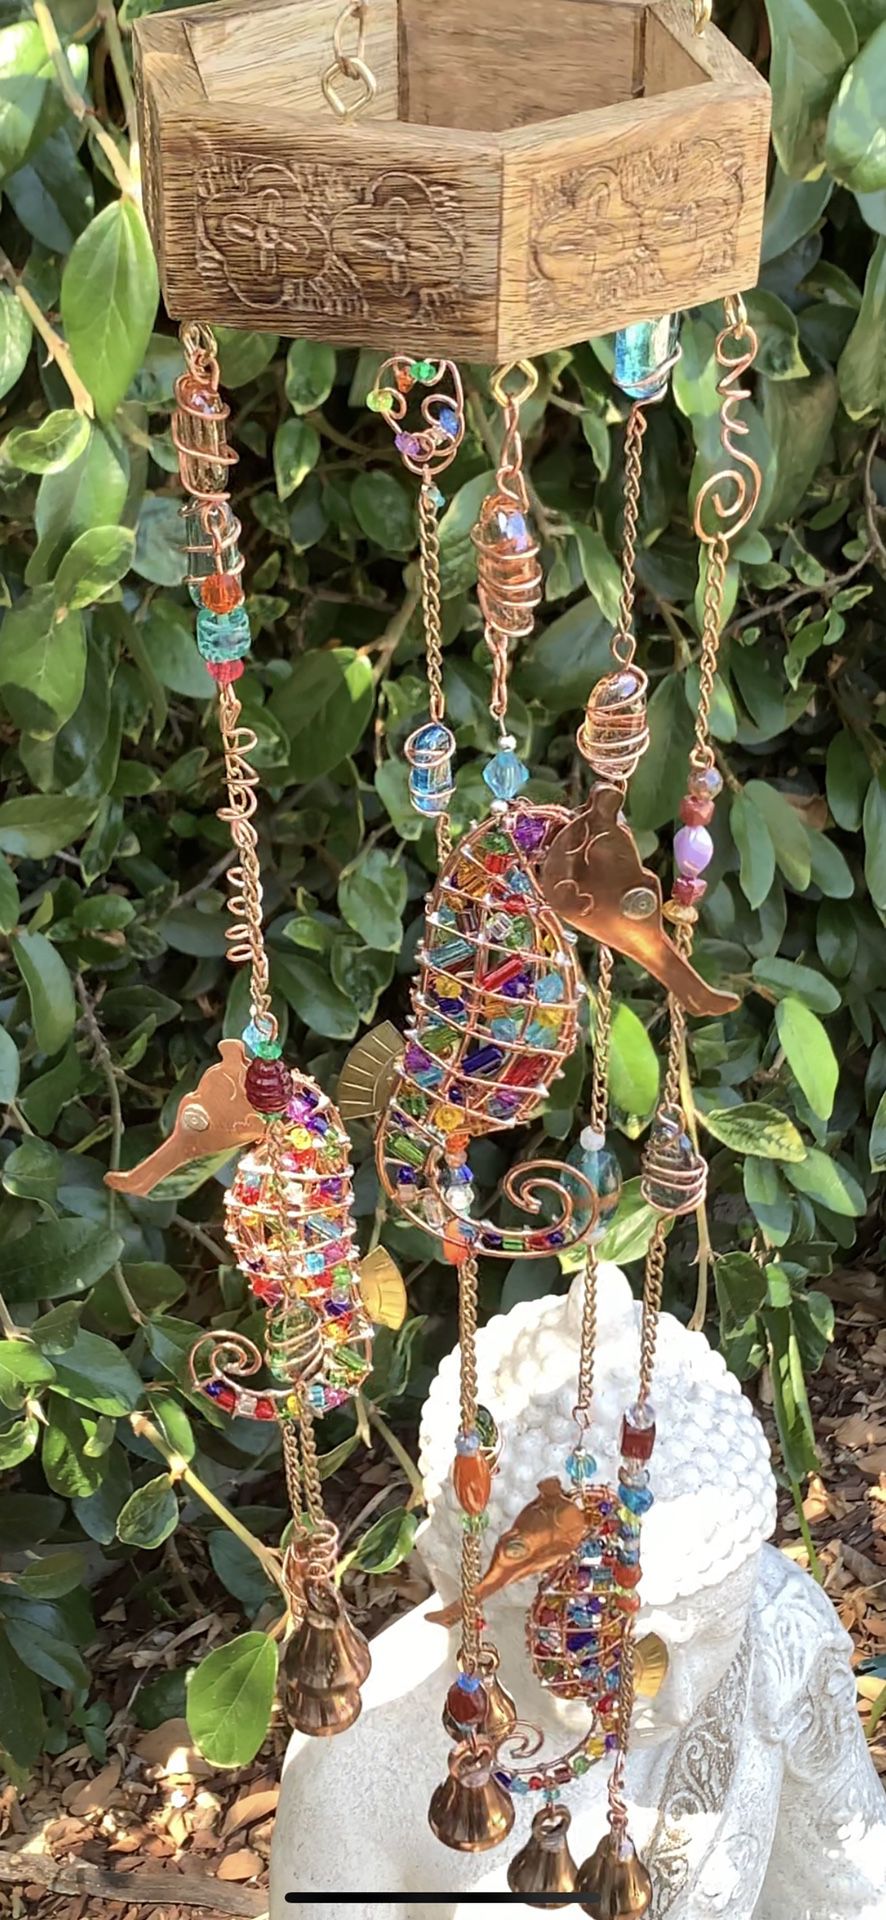 Gorgeous Glass Rocks & Beads Sea Horse Wind Chime Sun Catcher Mobile - Handmade, One Of A Kind! 